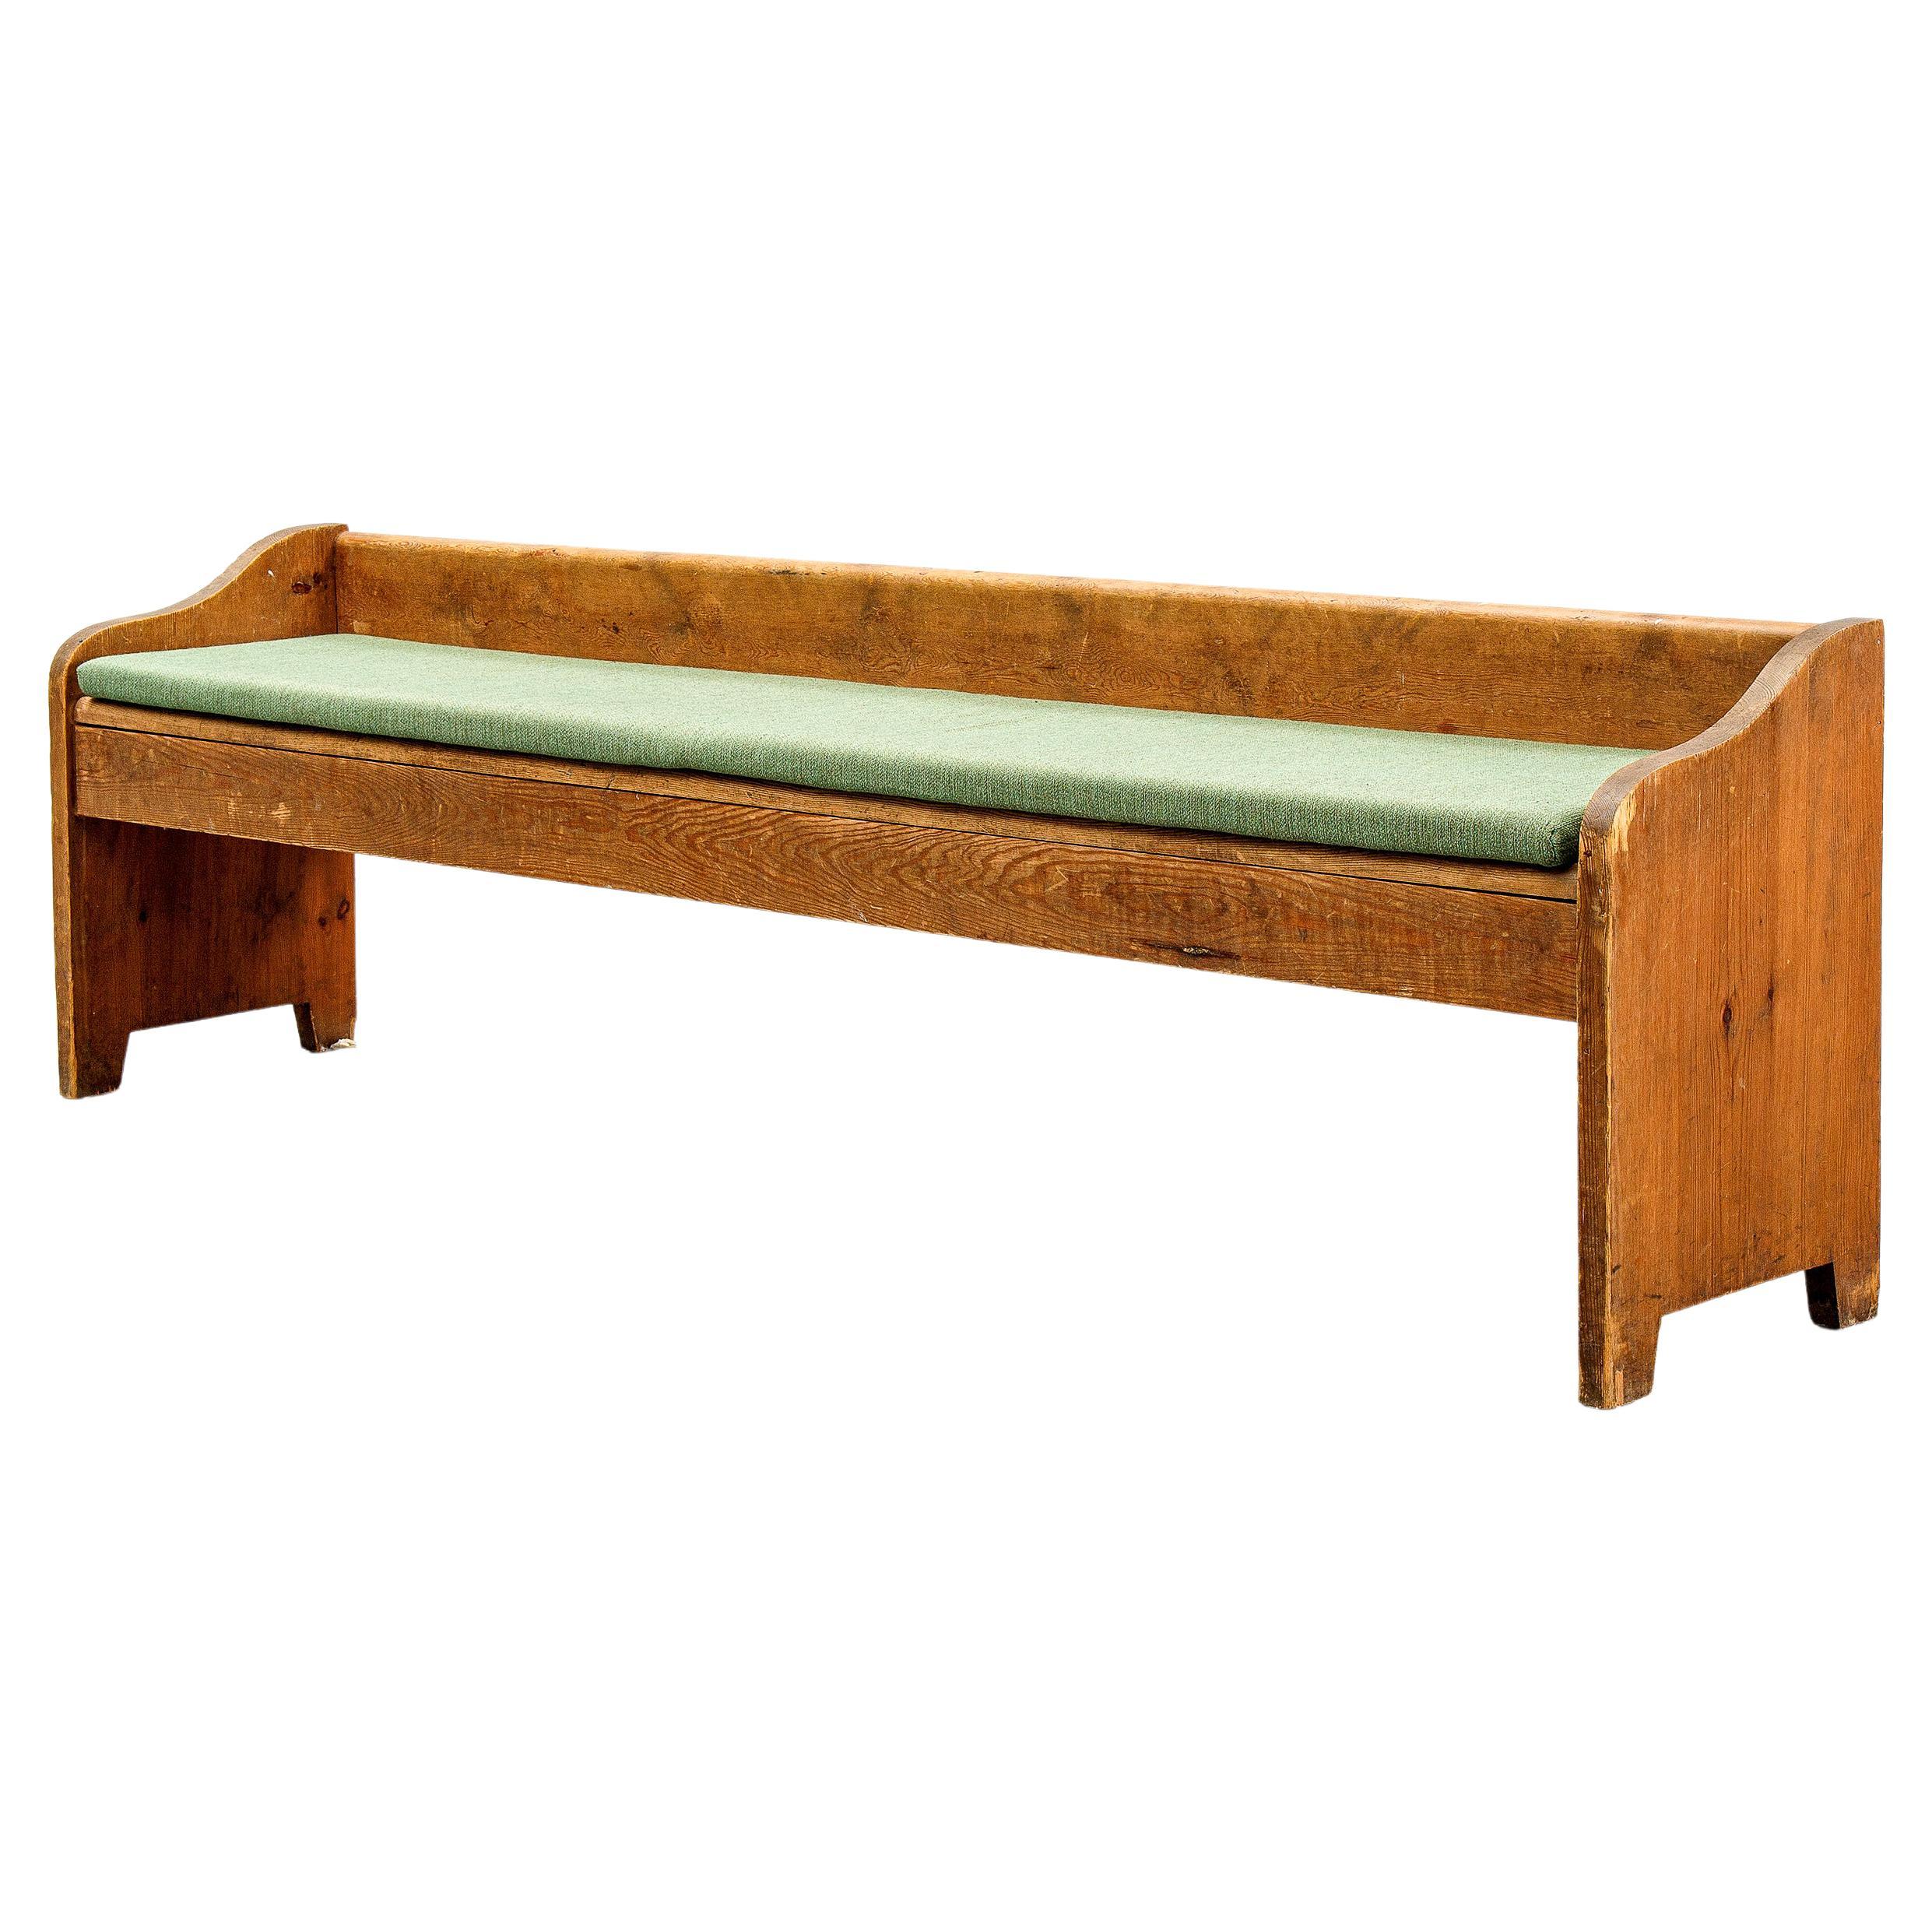 Swedish Pine Sofa in style of Axel Einar Hjorth Produced in Sweden 1930s